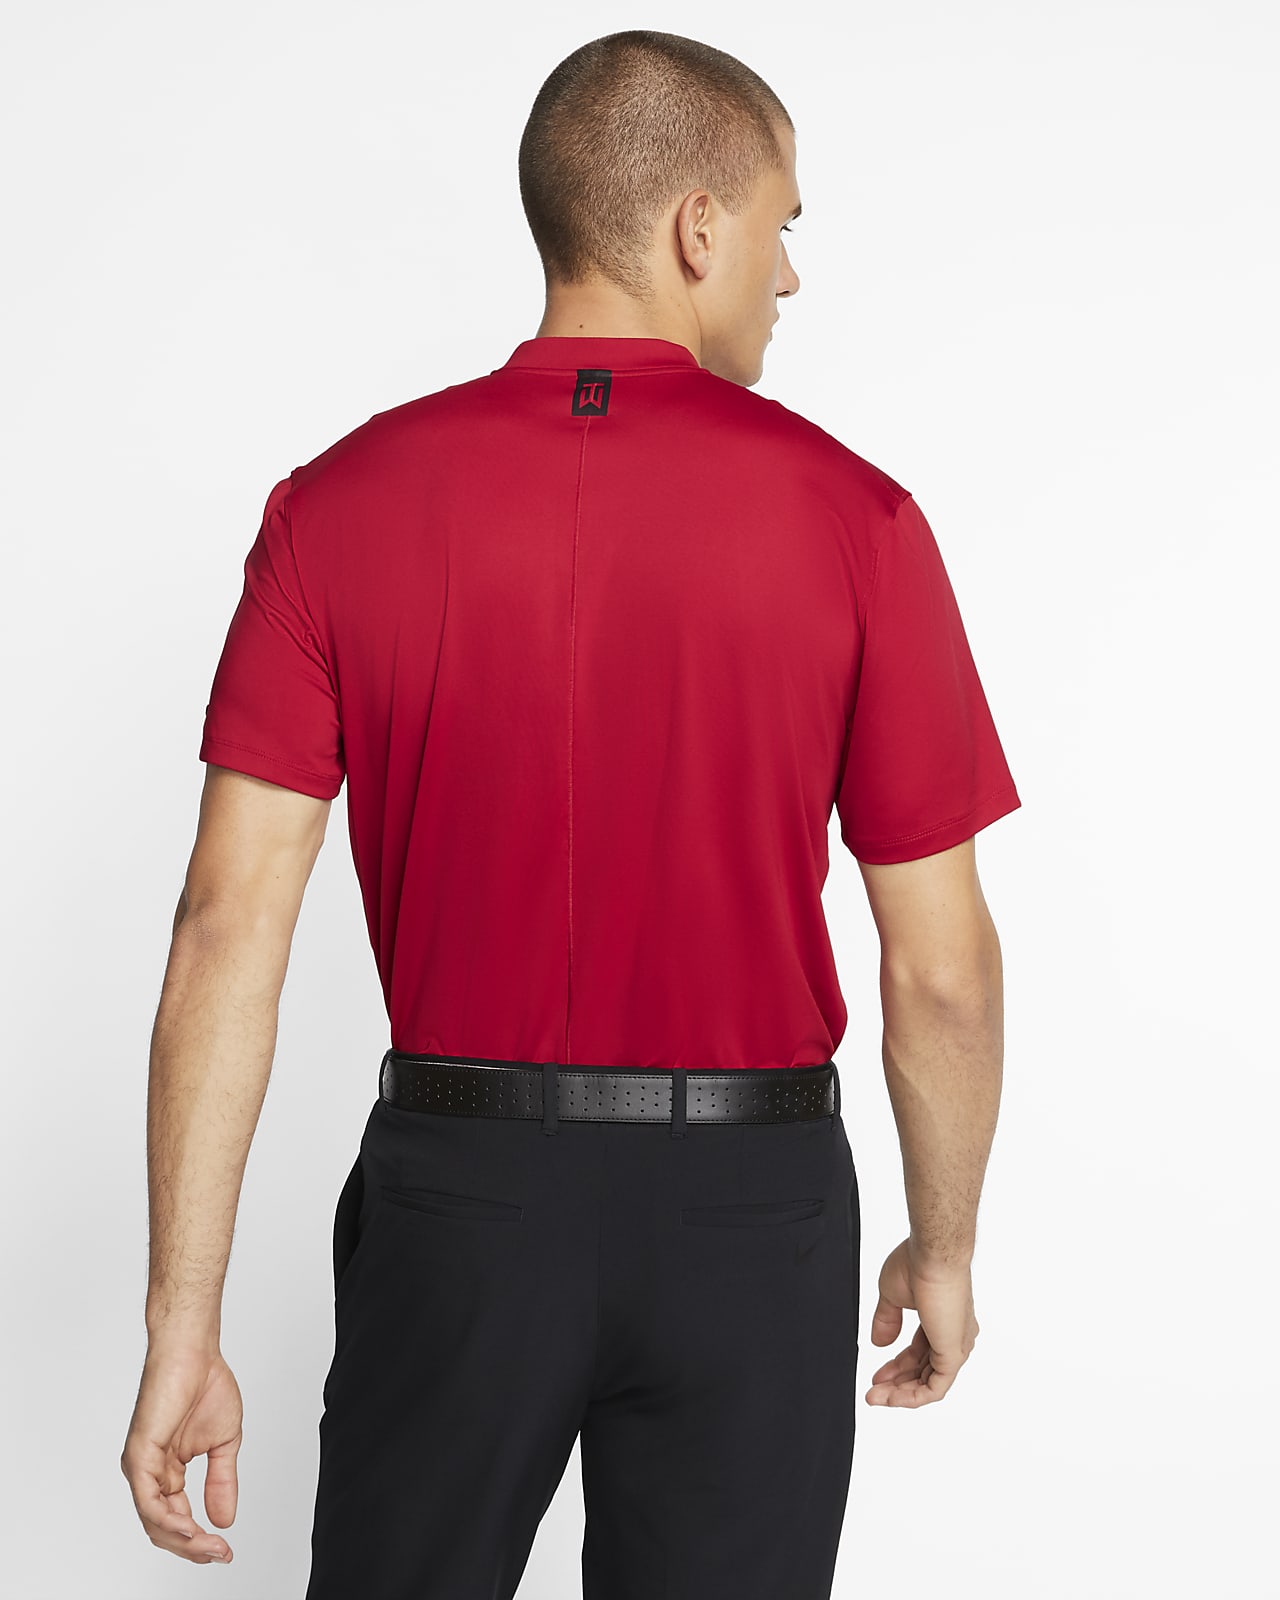 tiger woods polo